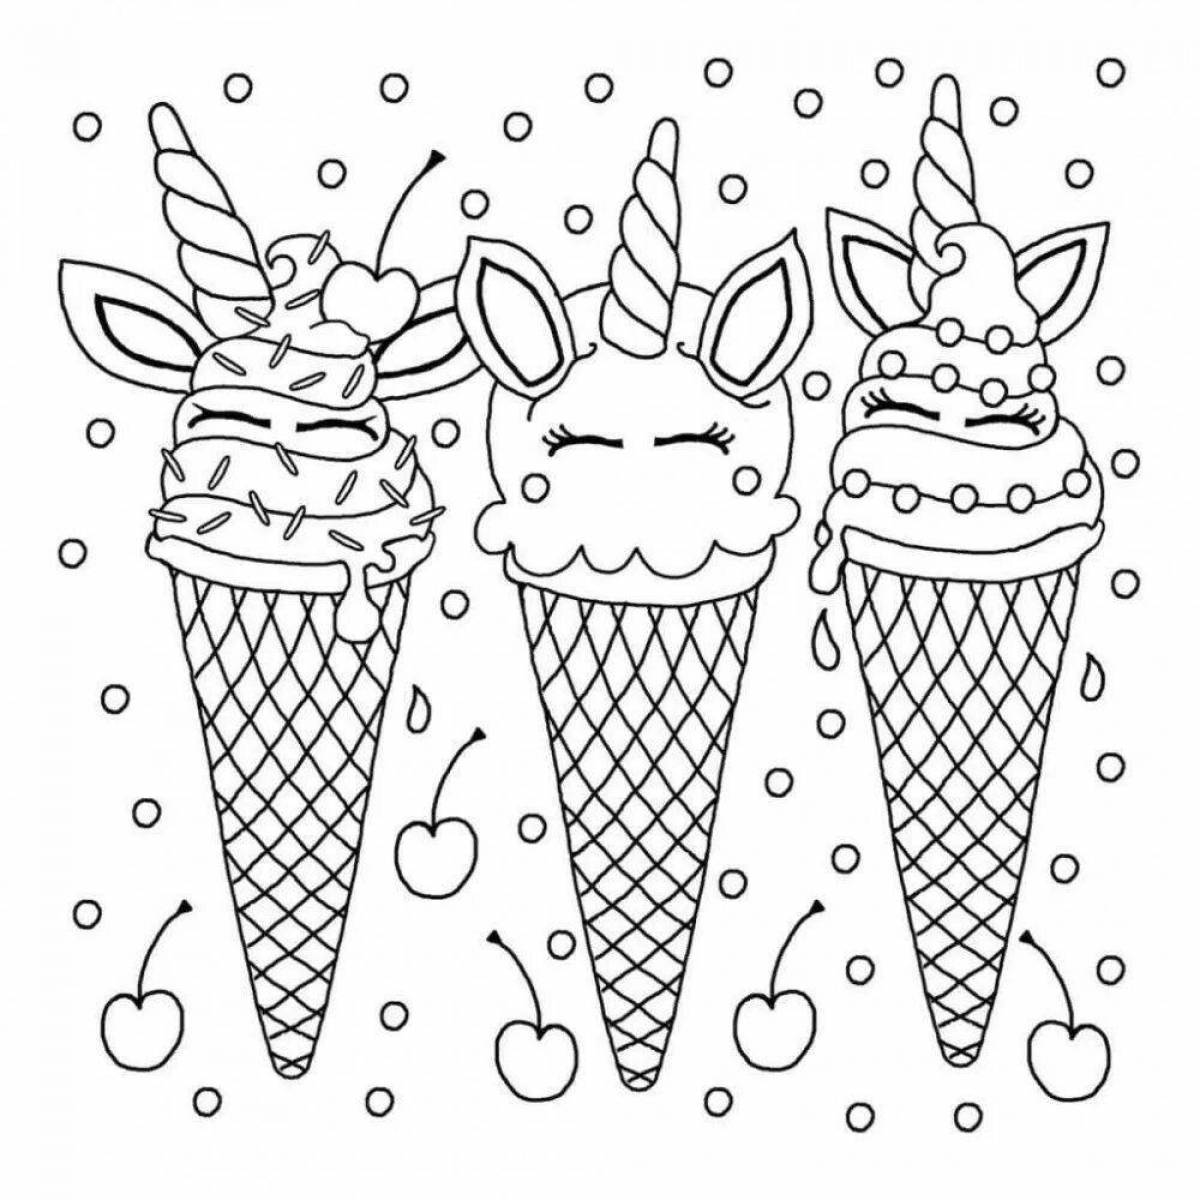 Refreshing ice cream coloring page